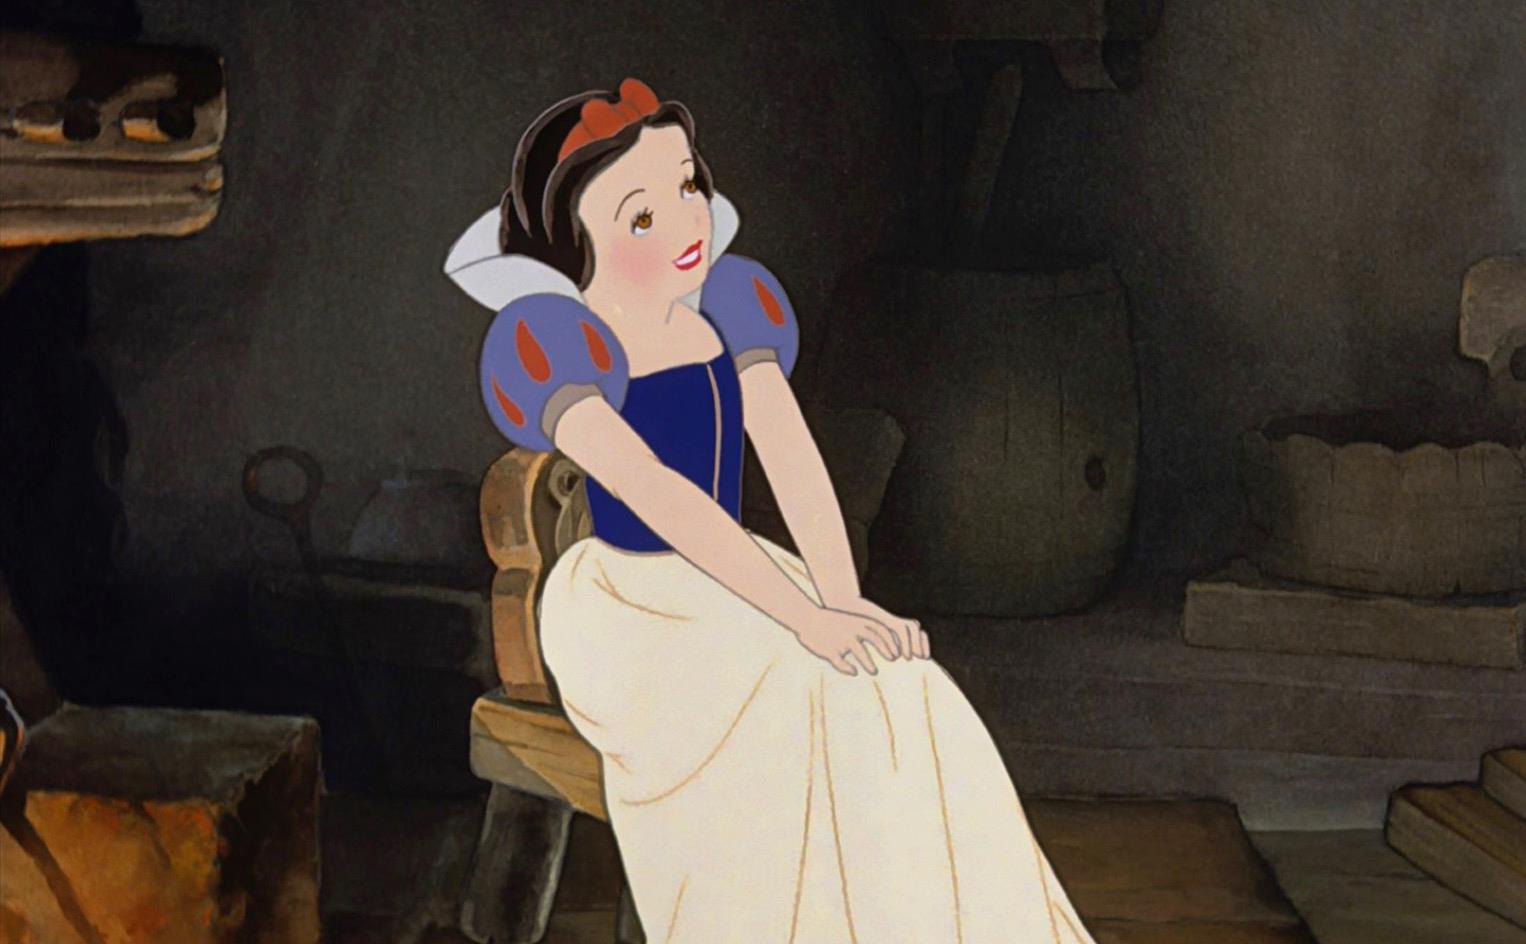 facebook.comDisney’s portrayal of princesses may be more influential than some may believe.